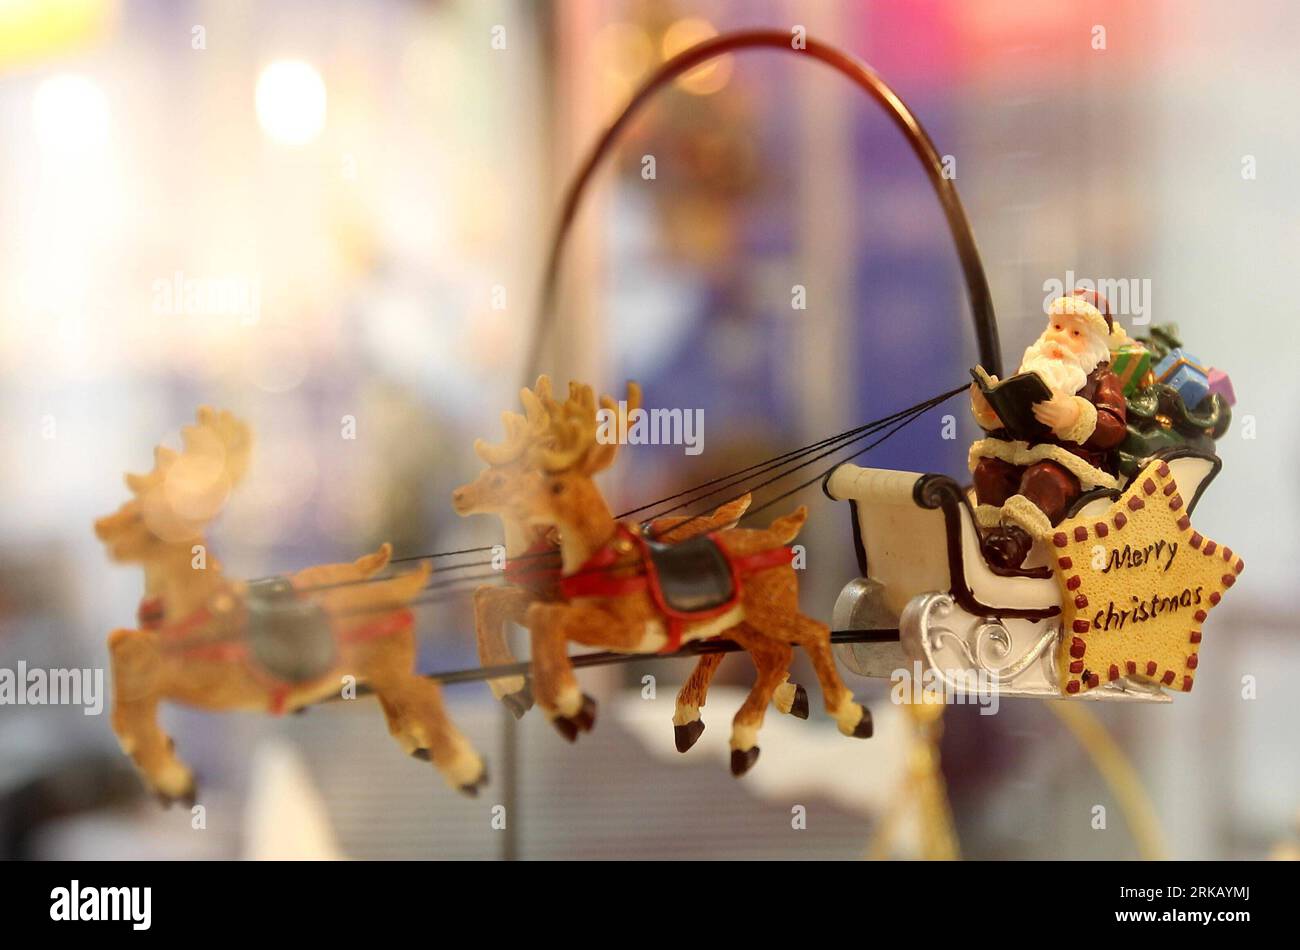 Bildnummer: 54436697  Datum: 16.09.2010  Copyright: imago/Xinhua (100916) -- MOSCOW, Sept. 16, 2010 (Xinhua) -- A Christmas decoration is exhibited during the 18th Specialty Advertising & Promotional products fair at the Crocus Expo International Exhibition Center in Moscow, Russia, Sept. 16, 2010. Some 200 exhibitors took park in the three-day expo which opened on Sept. 14. (Xinhua/Lu Jinbo) (zw) RUSSIA-MOSCOW-ADVERTISING & PROMOTIONAL PRODUCTS FAIR PUBLICATIONxNOTxINxCHN Wirtschaft Messe kbdig xsk 2010 quer  o0 Objekte, Weihnachten, Figur, Weihnachtsmann, Schlitten    Bildnummer 54436697 Dat Stock Photo